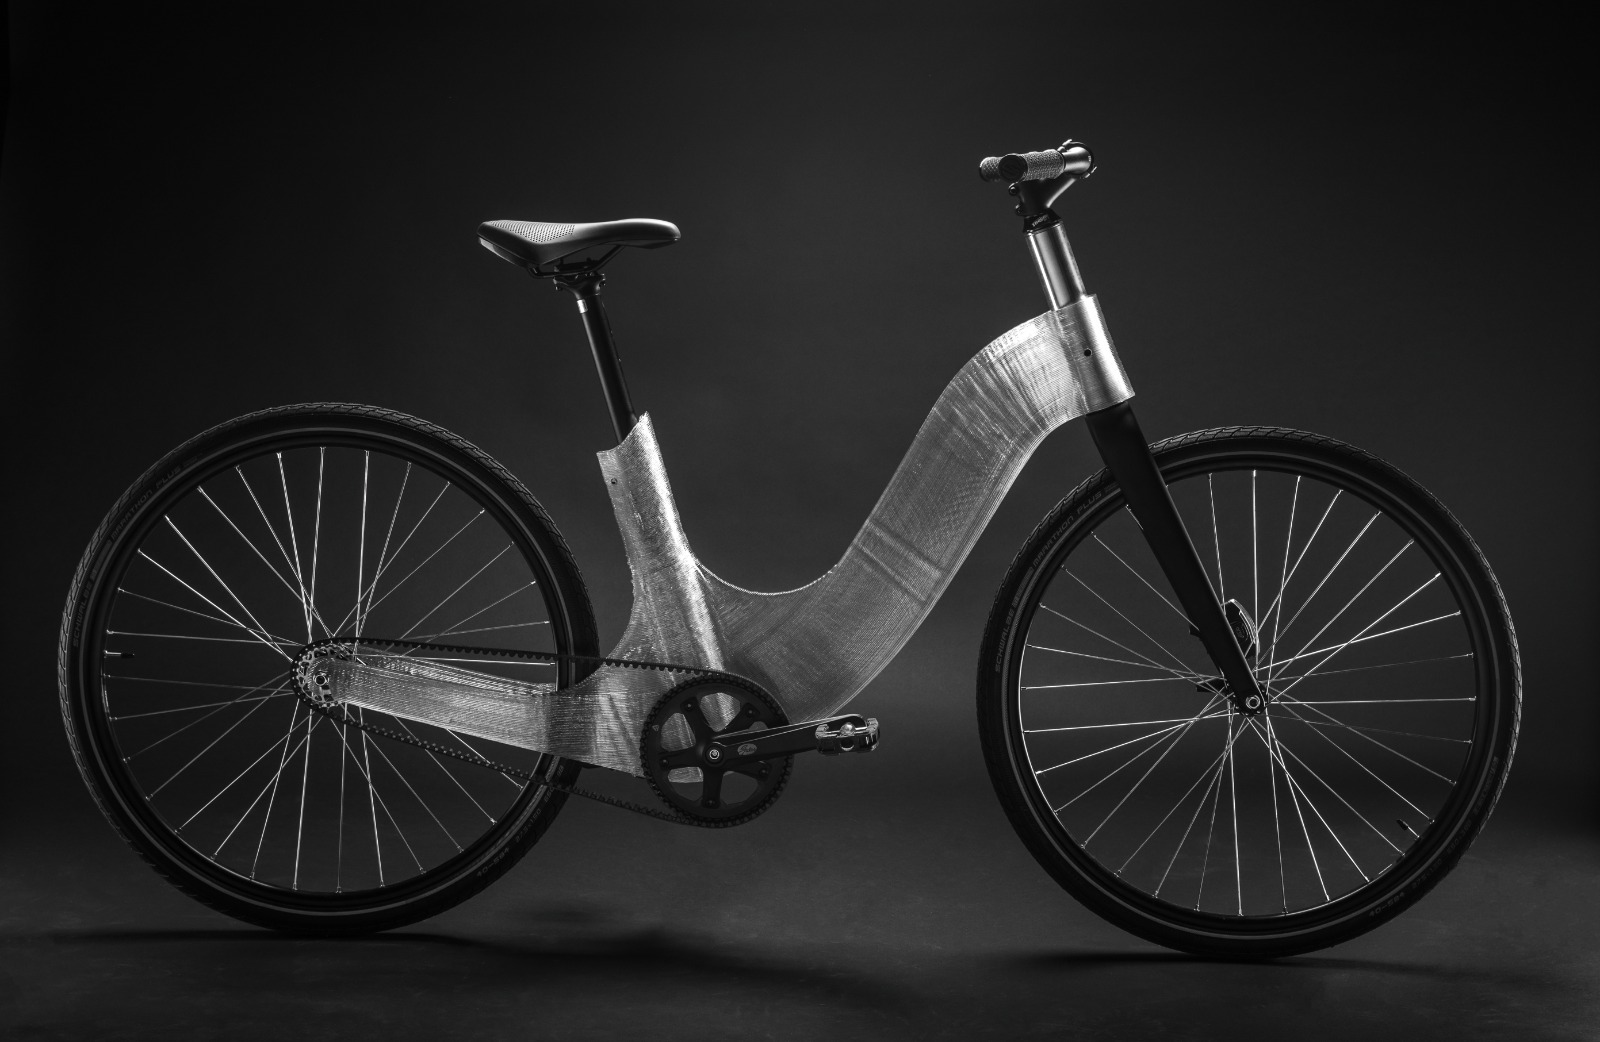 Polycarbonate 3D printed bike frame as part of a functional bike on a blank background